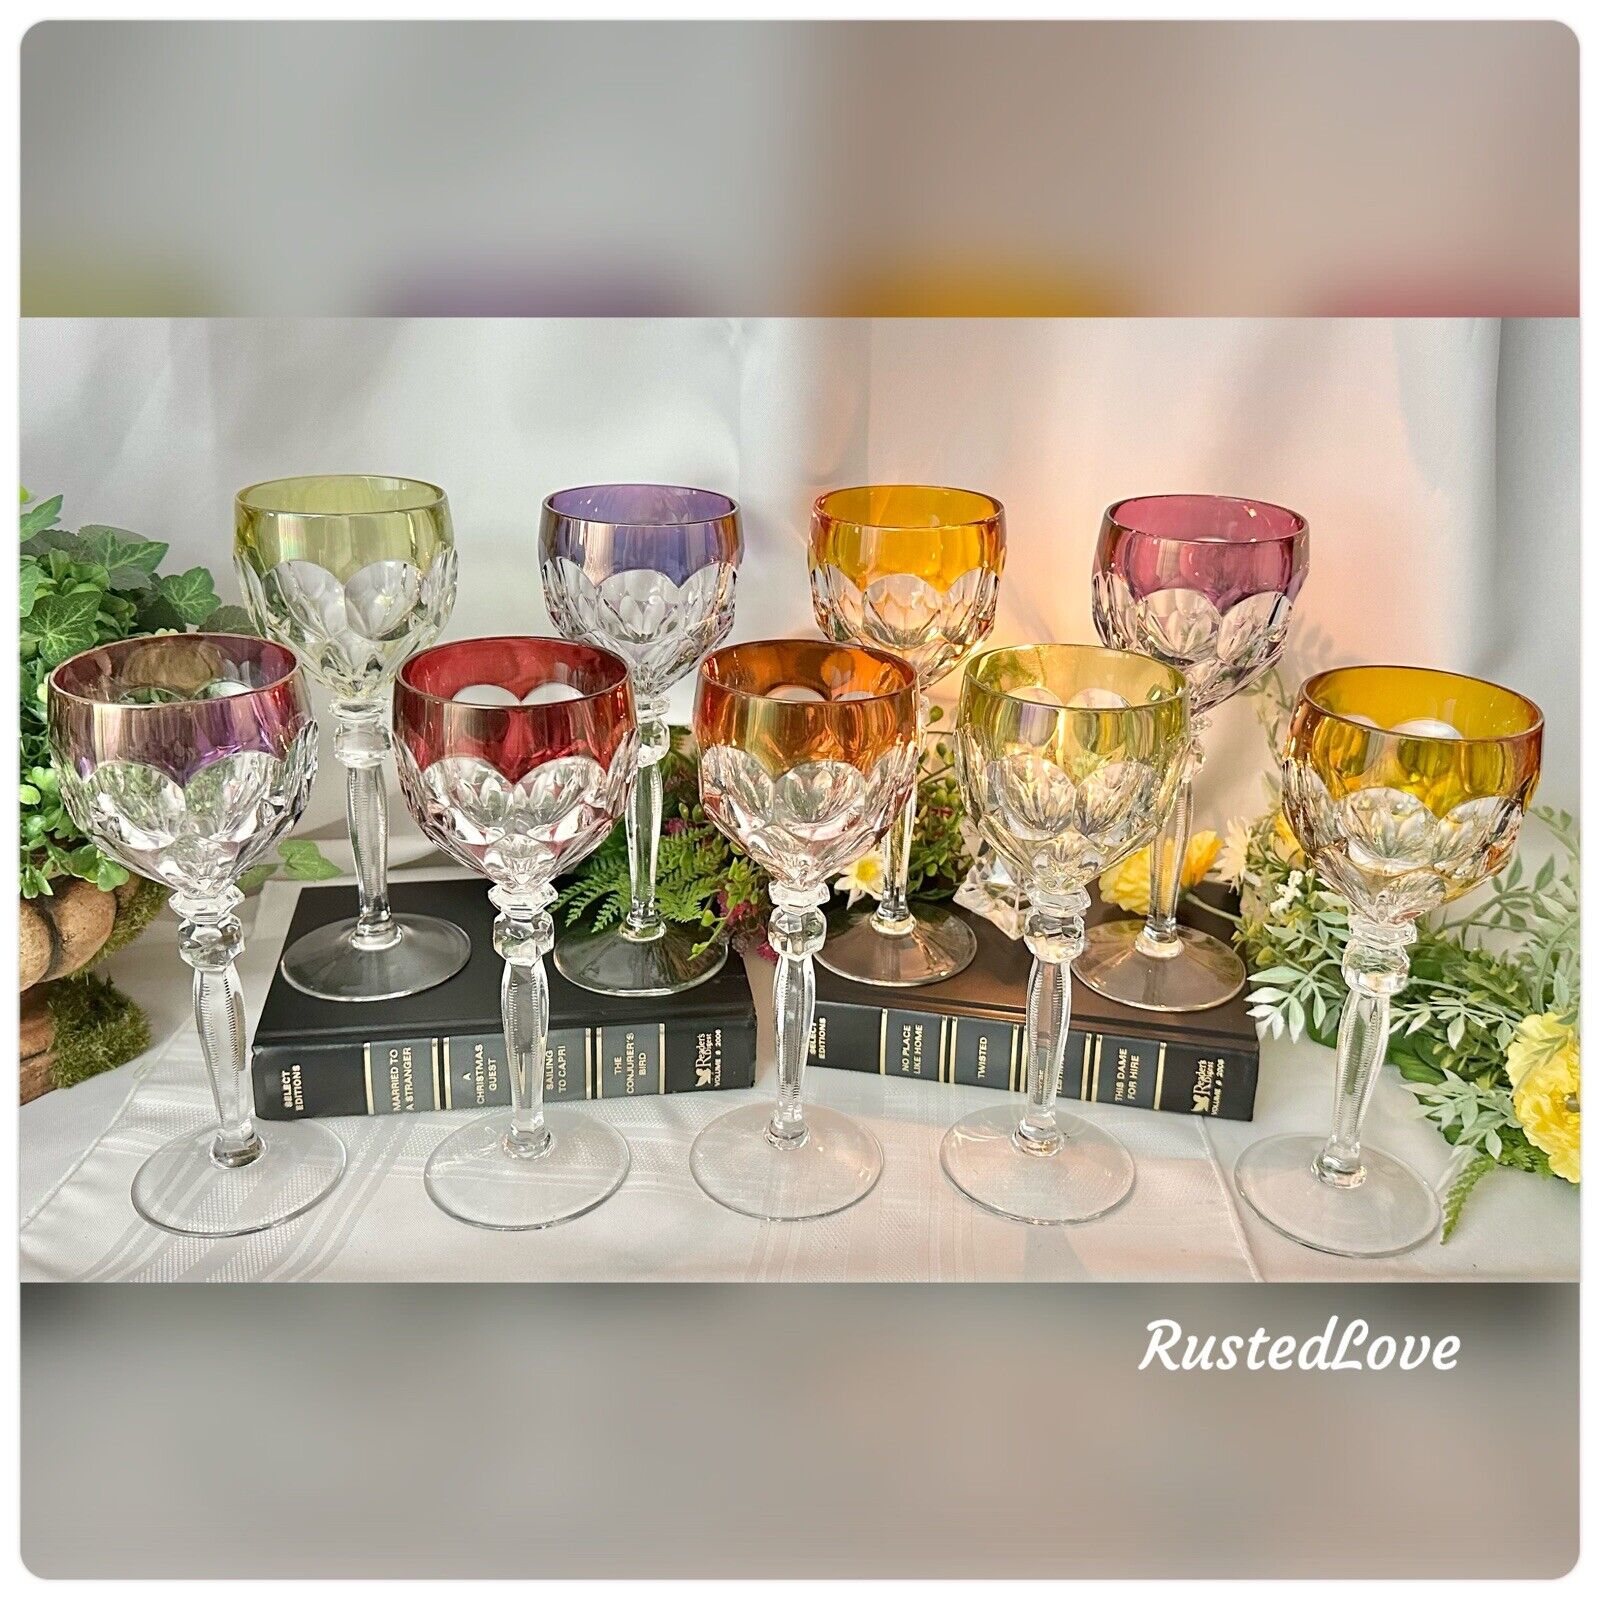 Anna Hutte Hock Wine Glasses Germany ANN5 Cased Crystal Colored Goblets - 9 Pc